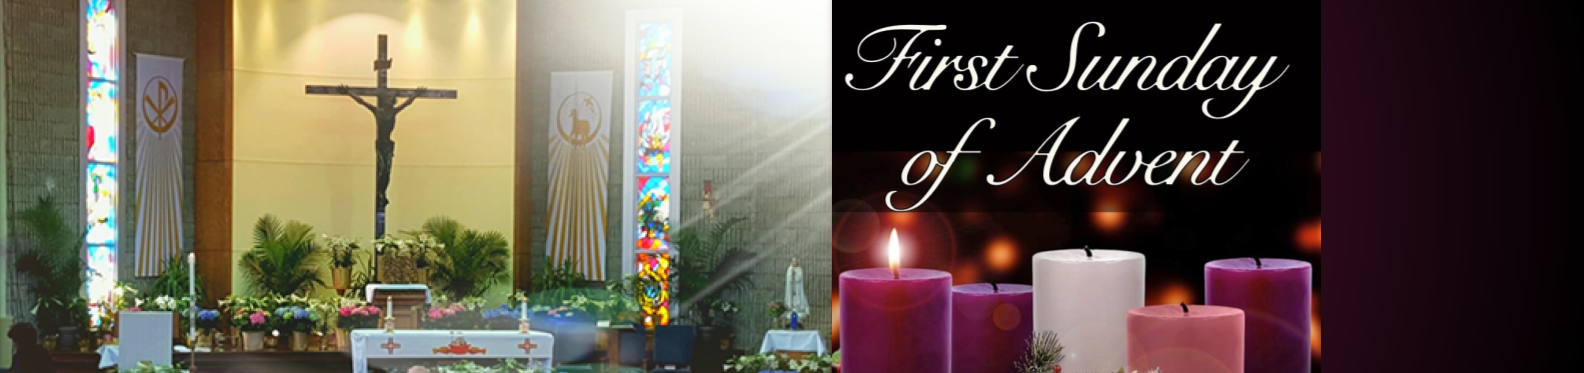 First Sunday of Advent November 28, 2021